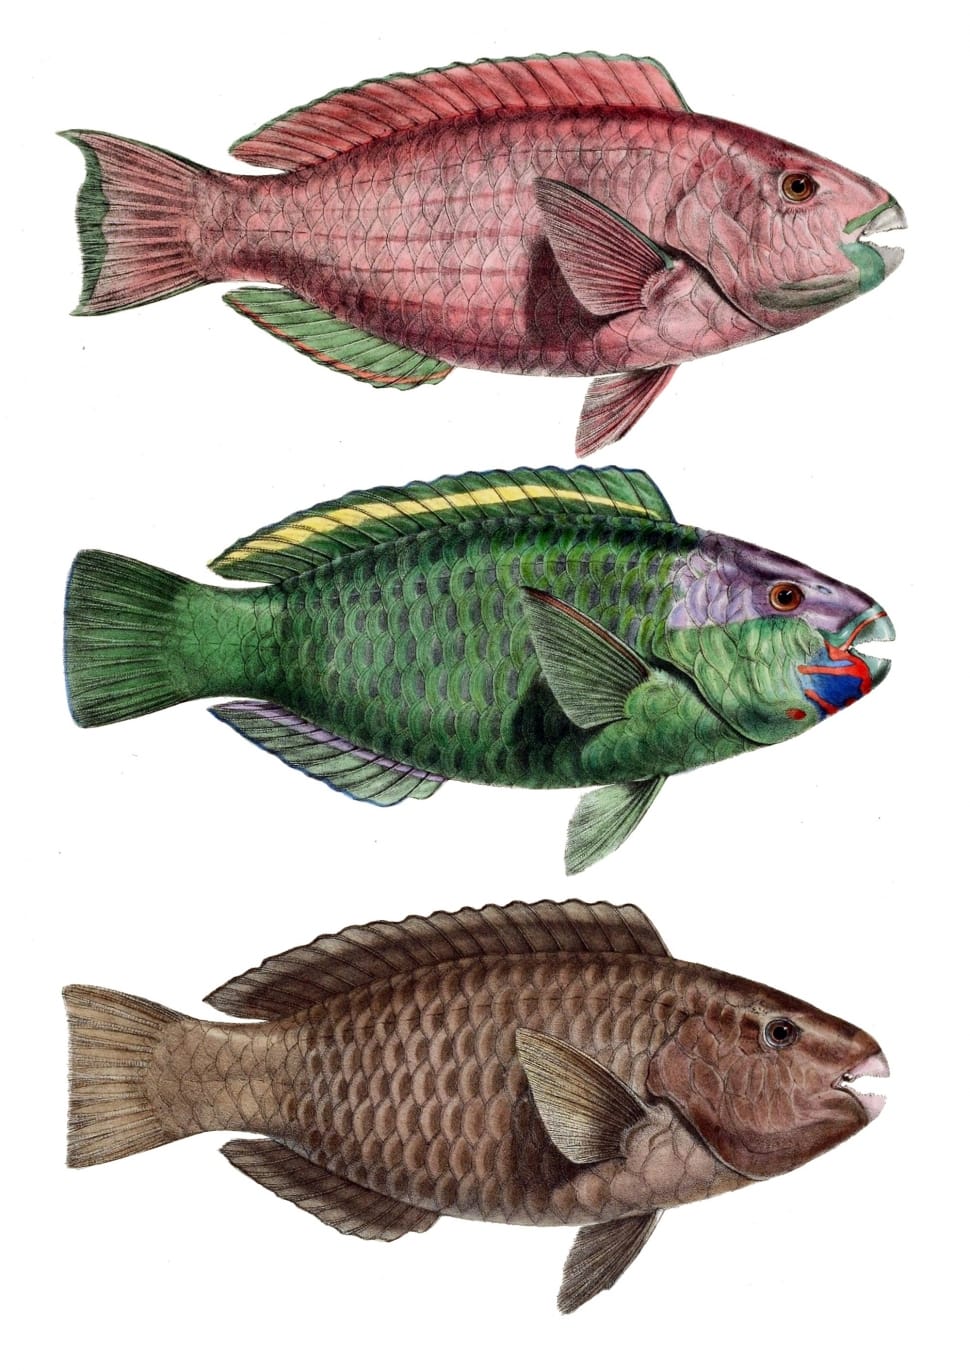 3 fish illustration preview